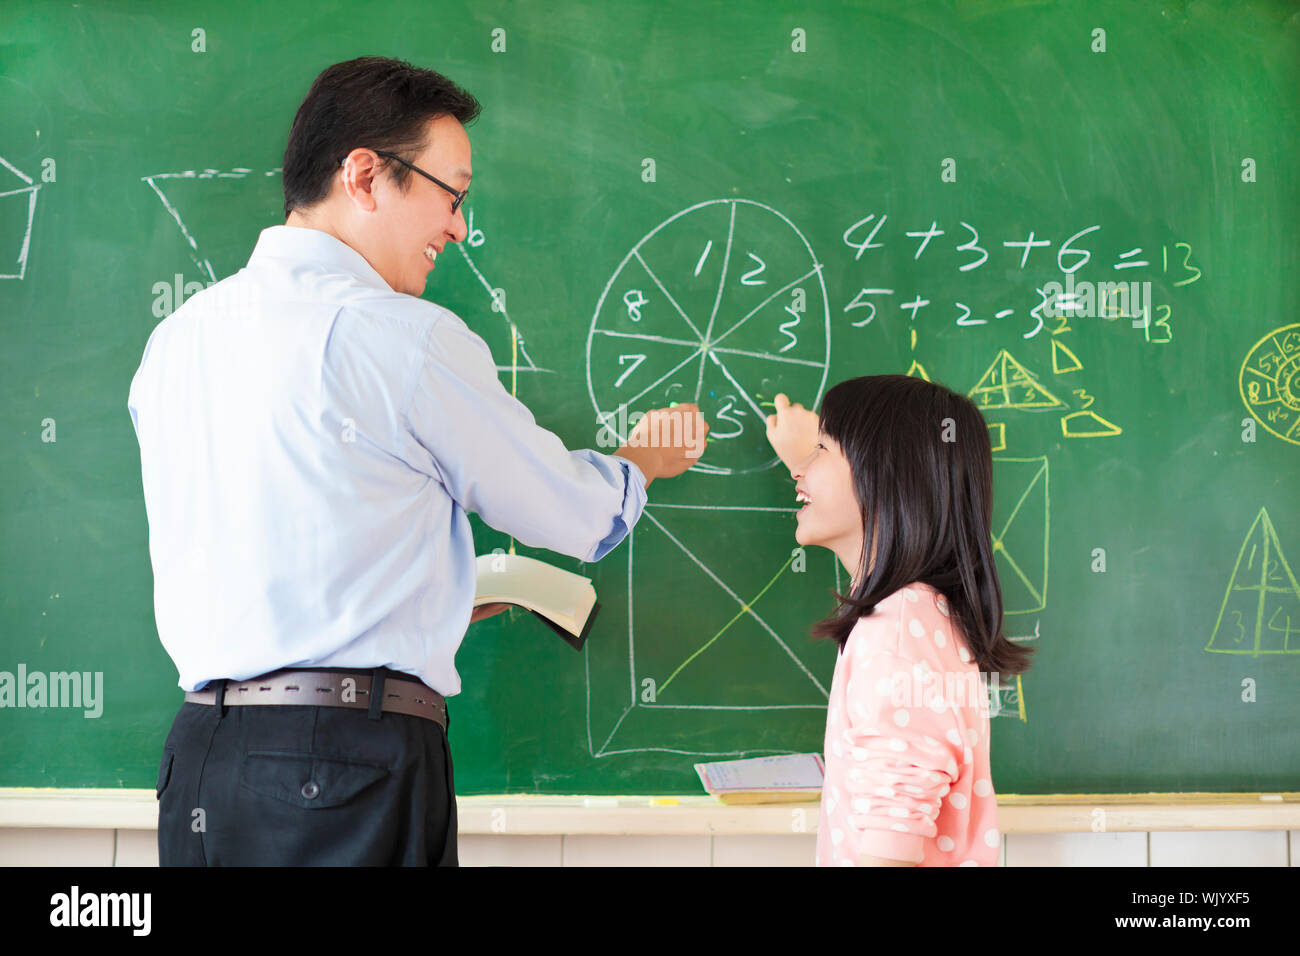 Teacher teach student how to solve the math questions Stock Photo